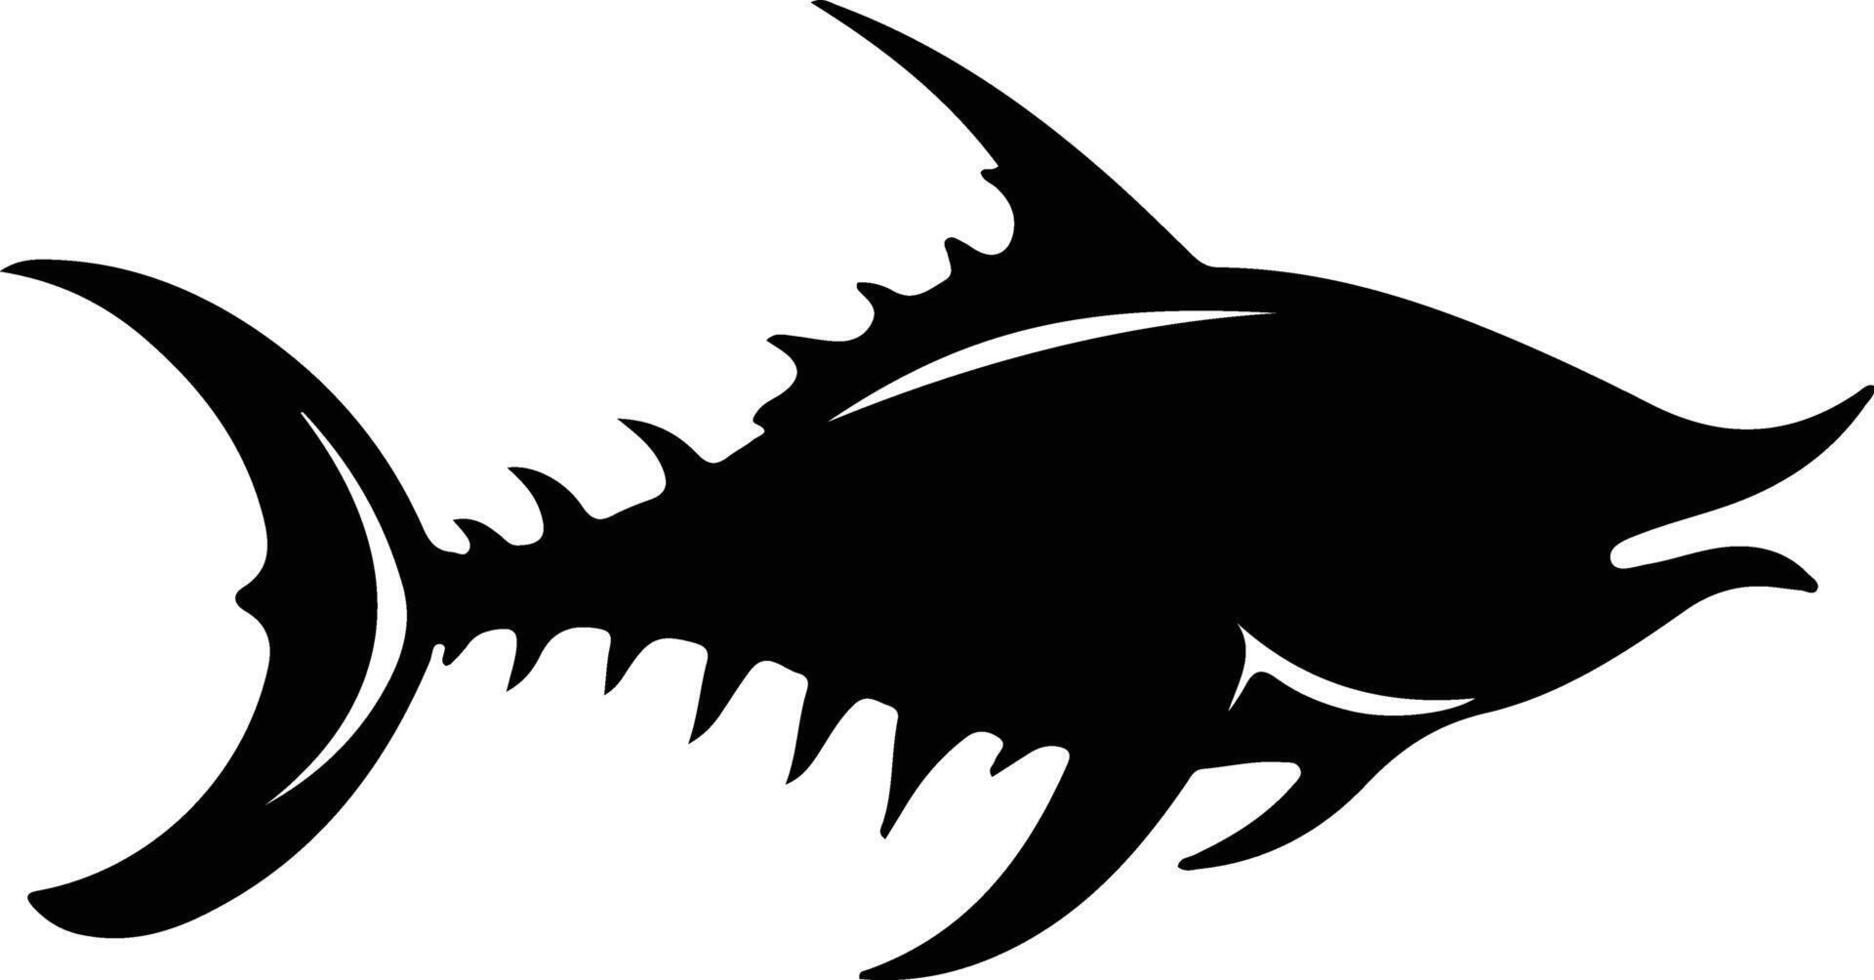 Orthacanthus black silhouette vector